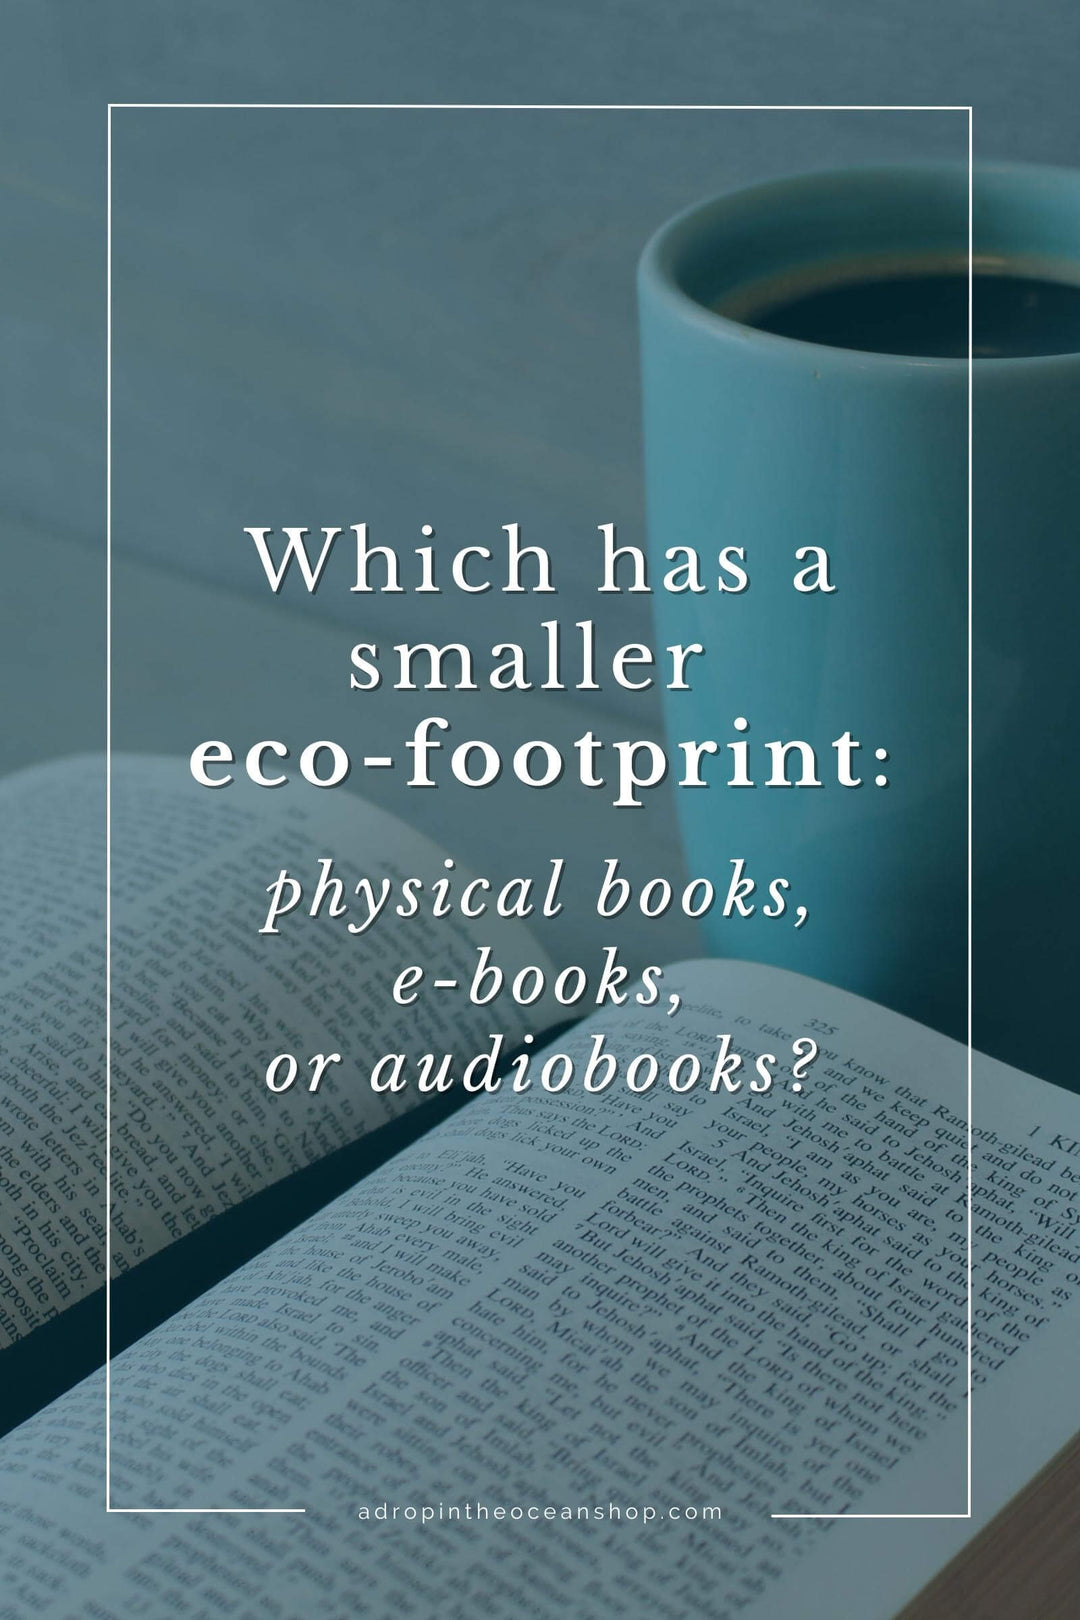 A Drop in the Ocean Blog: Which has a smaller eco-footprint - physical books, ebooks or audiobooks?